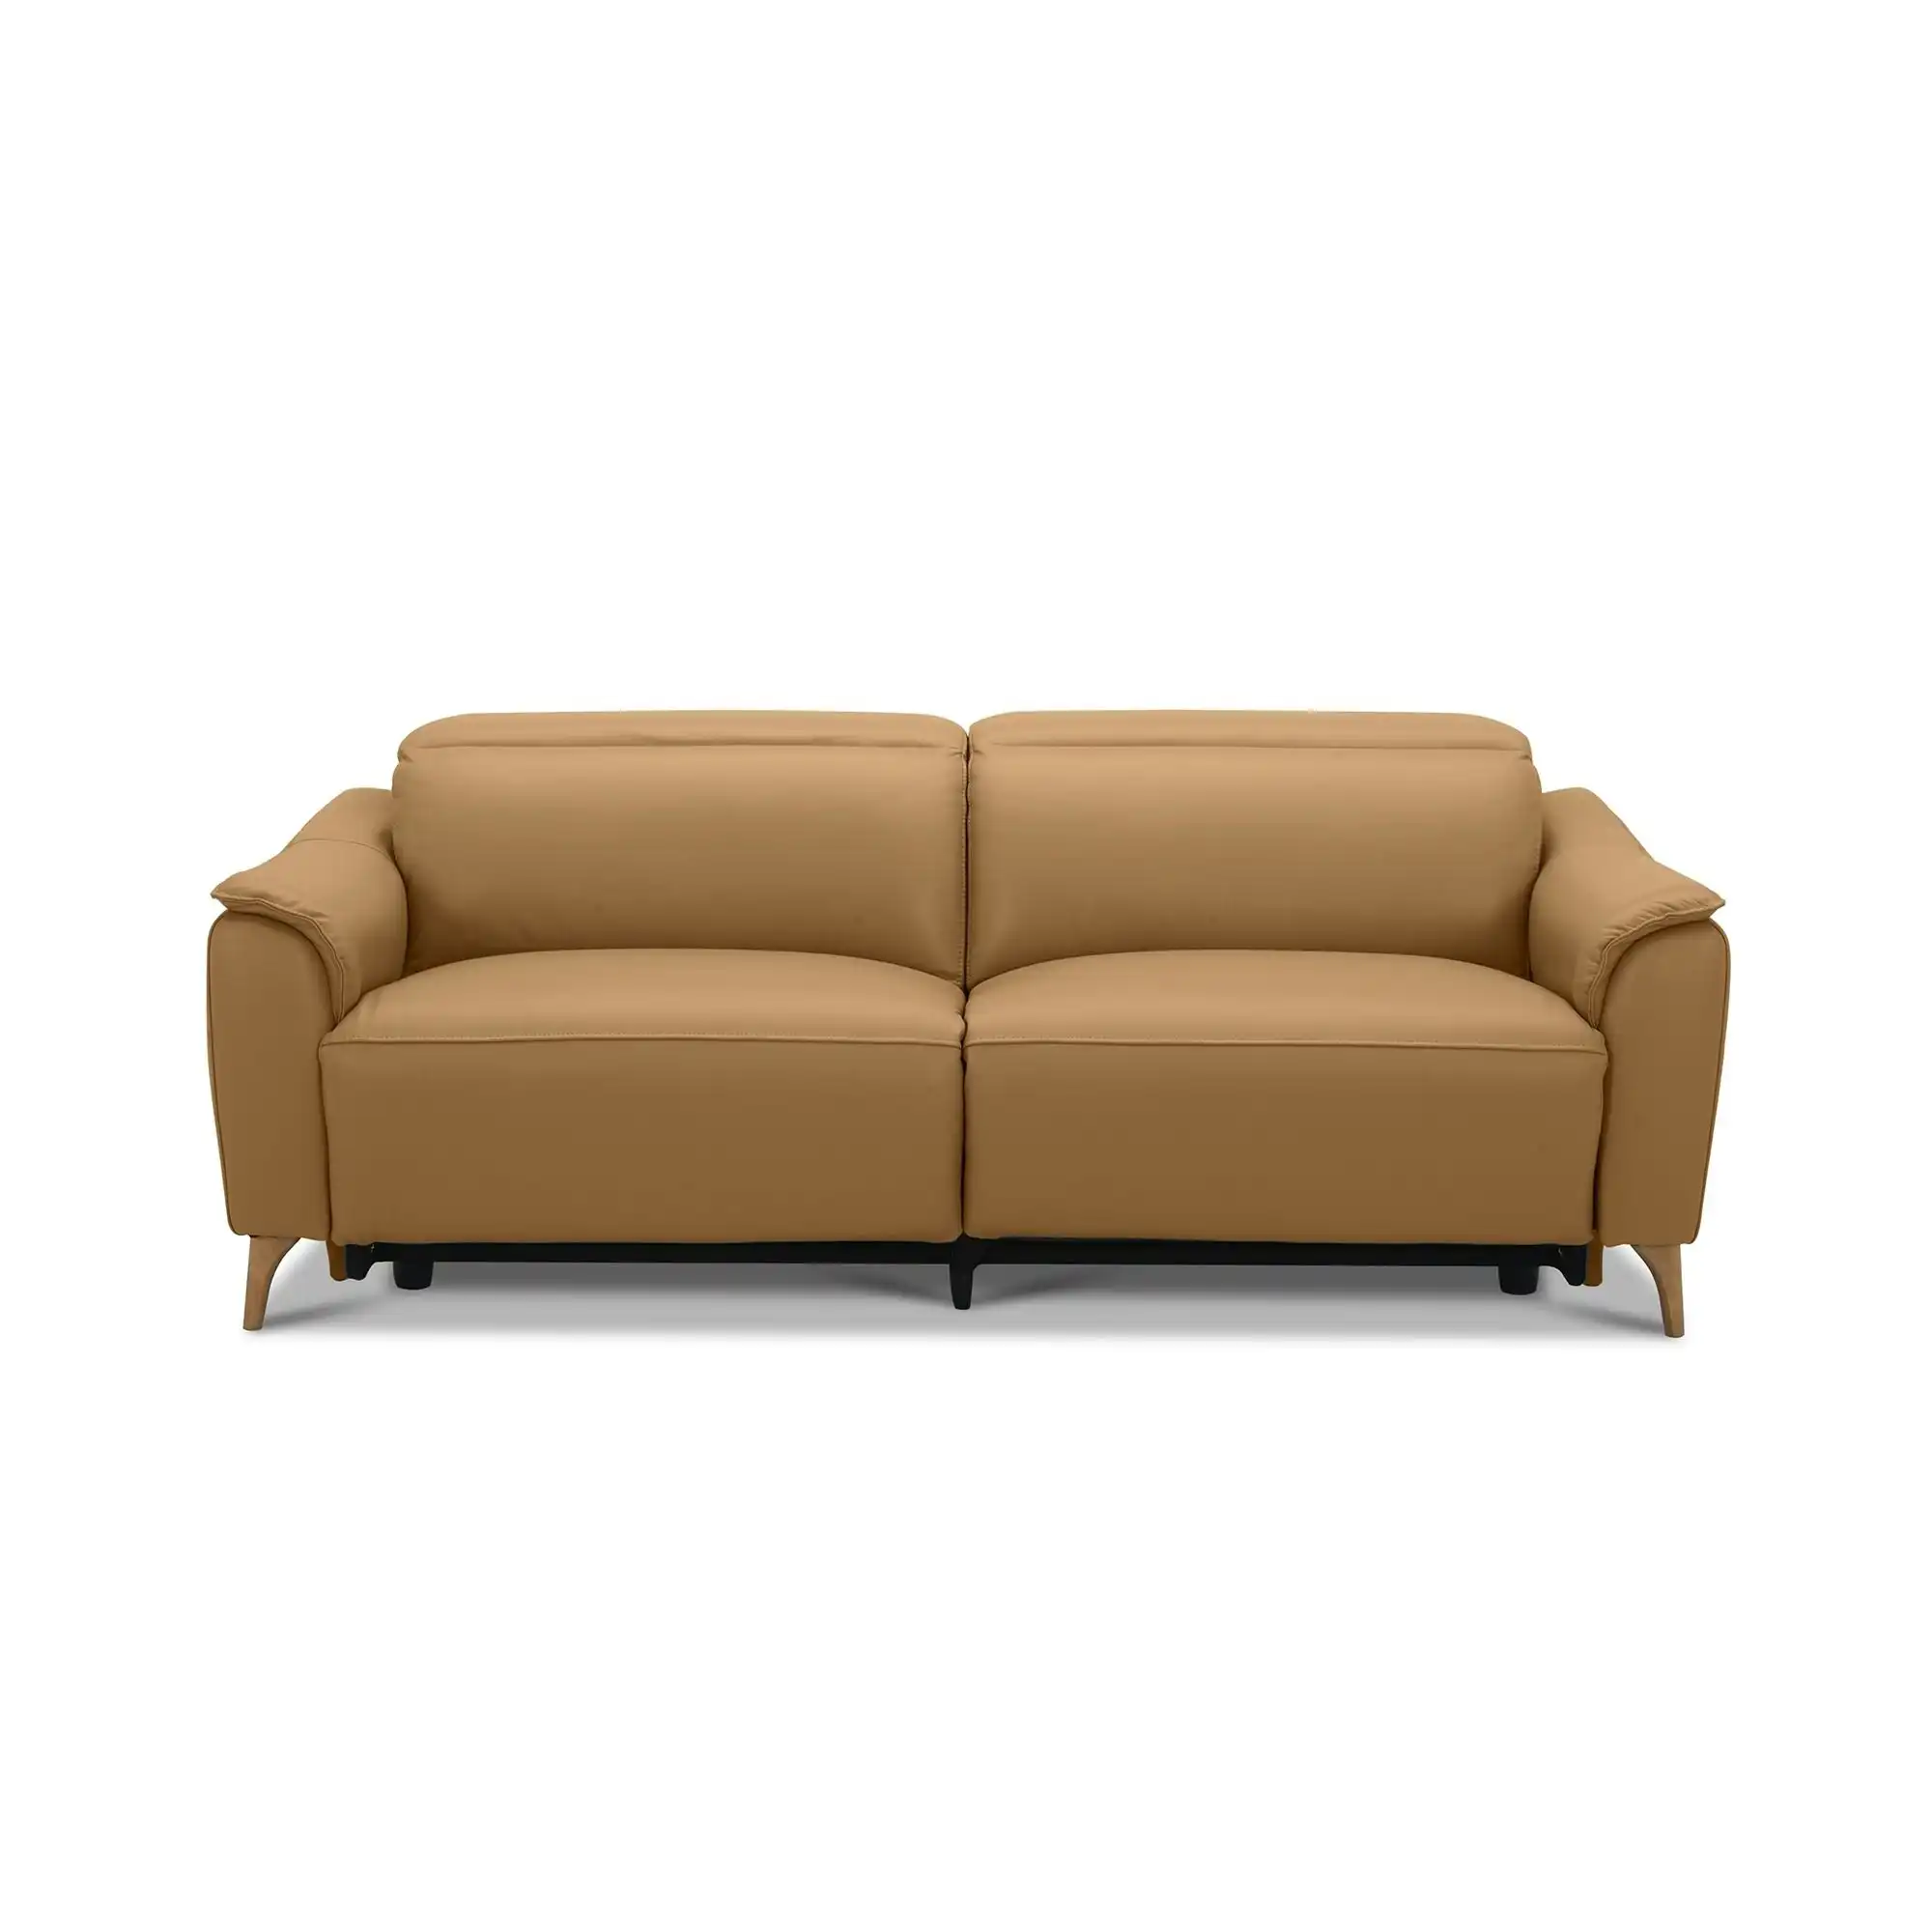 Inala 2.5 Seater Leather Electric Recliner Sofa